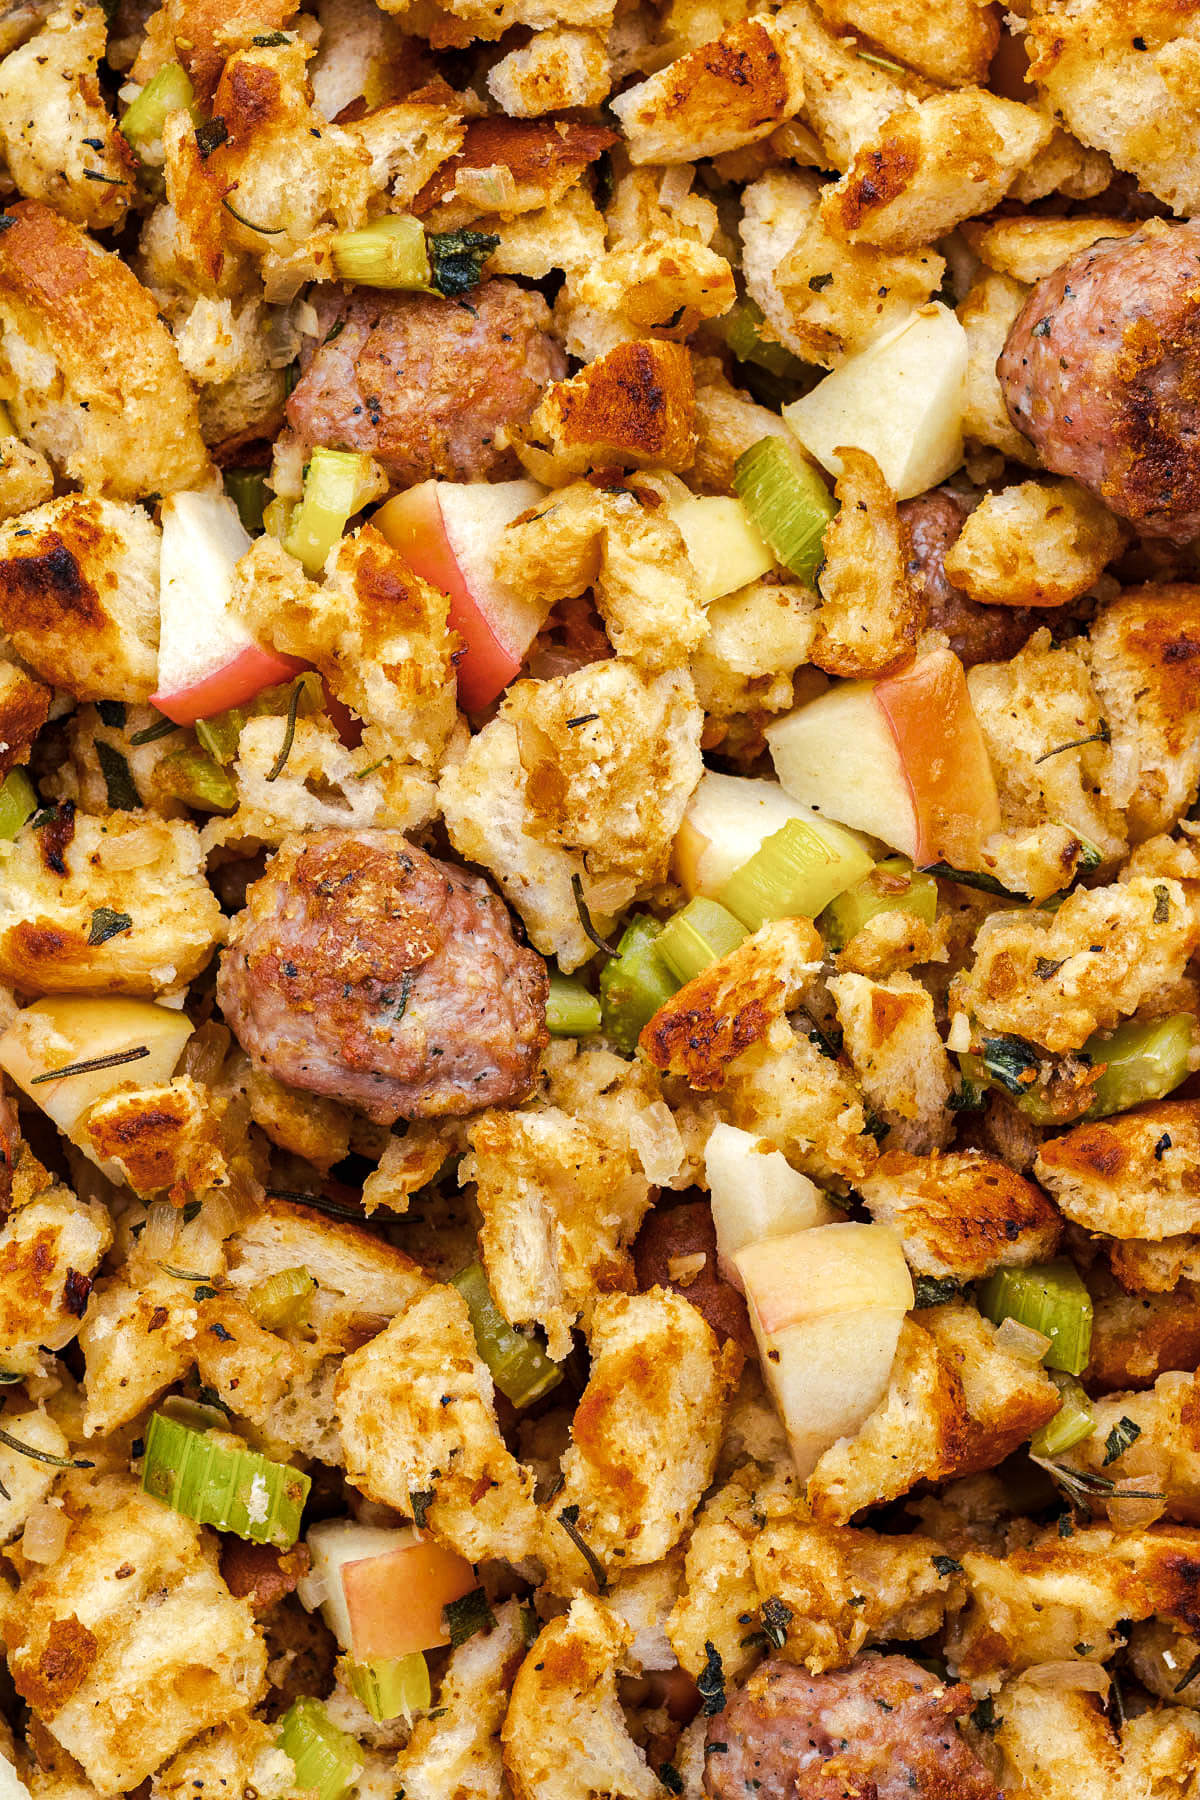 A close view of golden baked chunky bread crumbs, cooked sausage, apples, and celery garnished with fresh herbs.